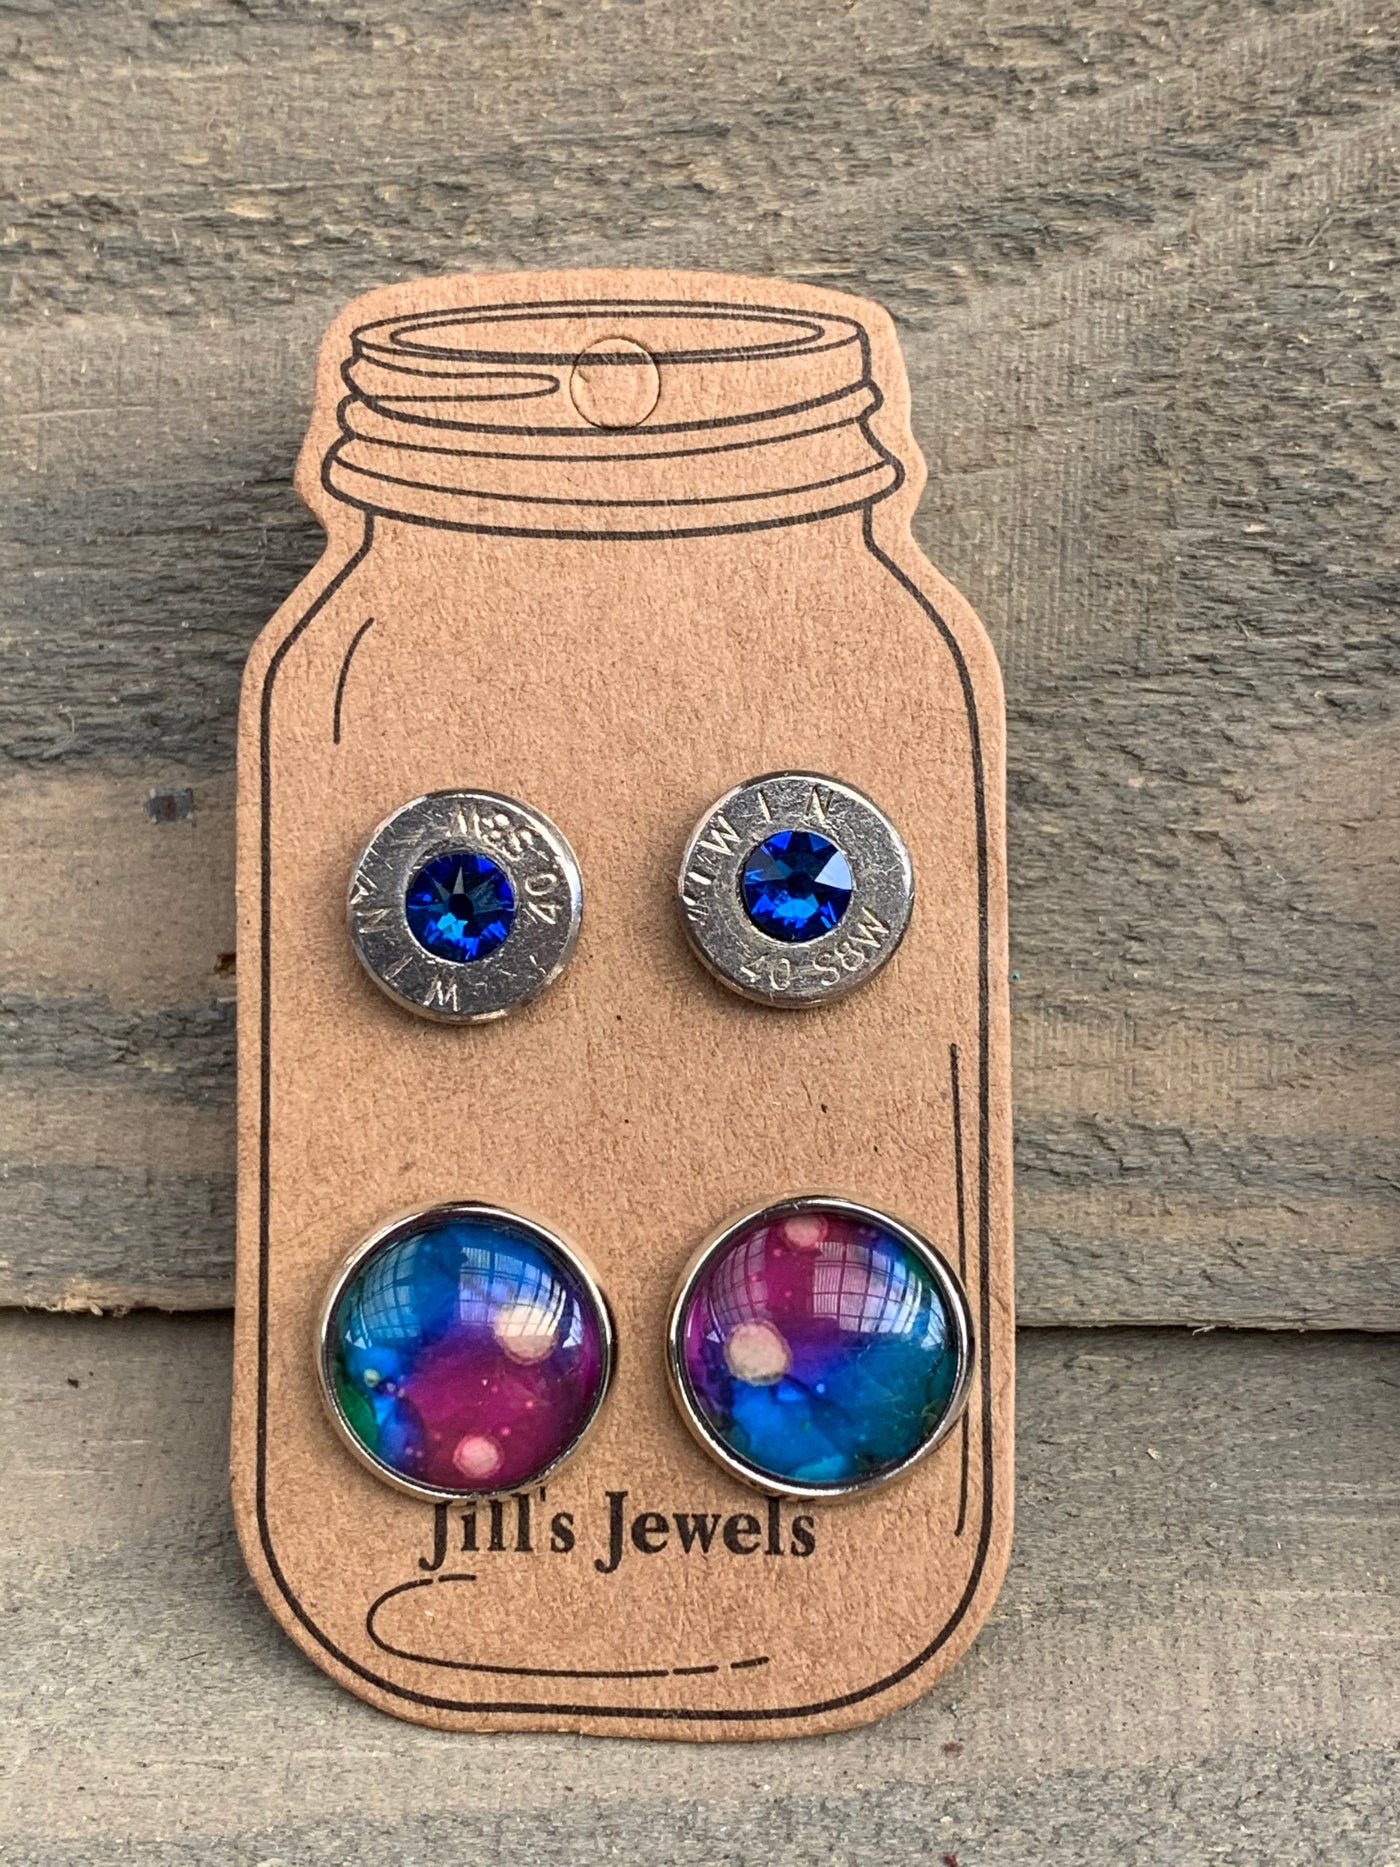 Blue Rainbow Splash 40 Caliber bullet earring set - Jill's Jewels | Unique, Handcrafted, Trendy, And Fun Jewelry